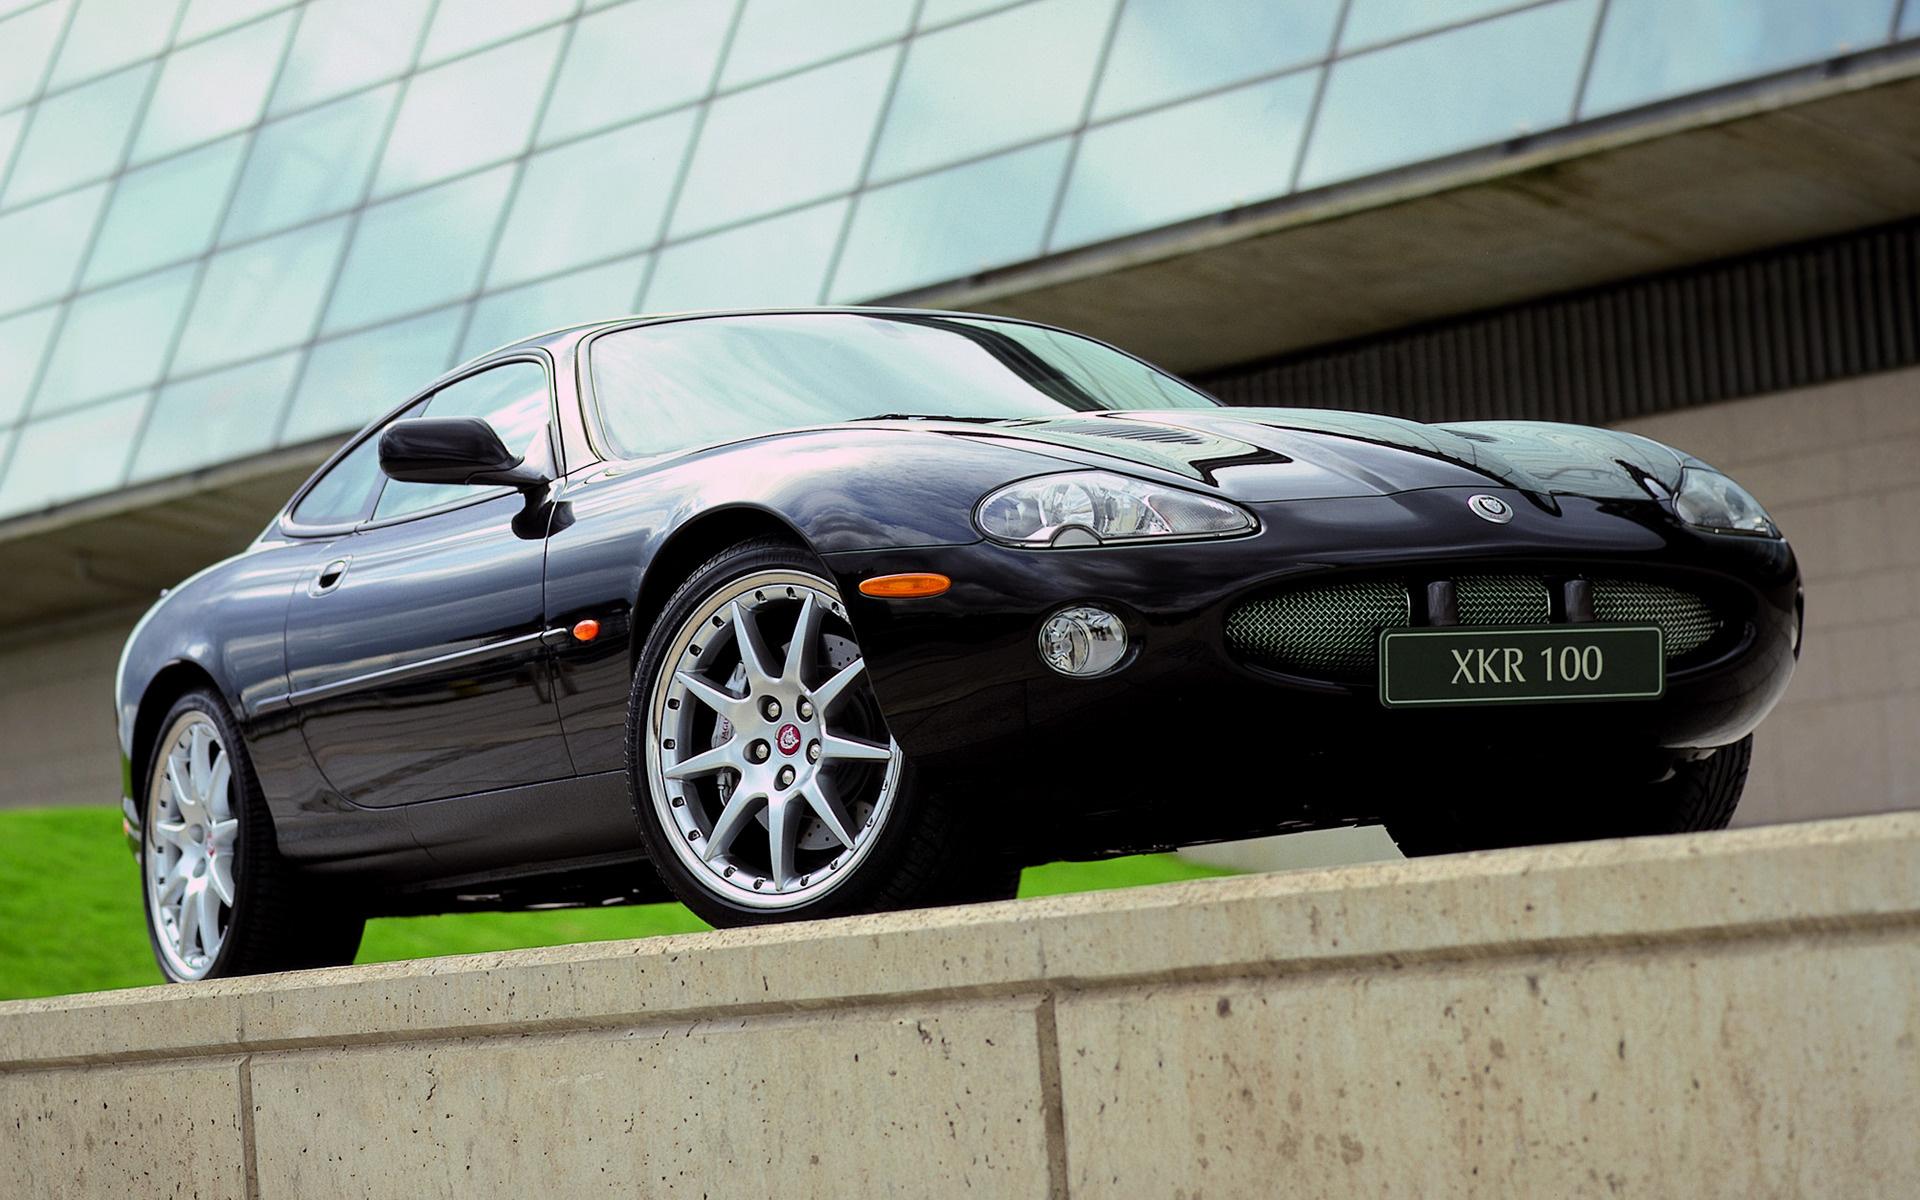 Jaguar XKR 100 Coupe and HD Image